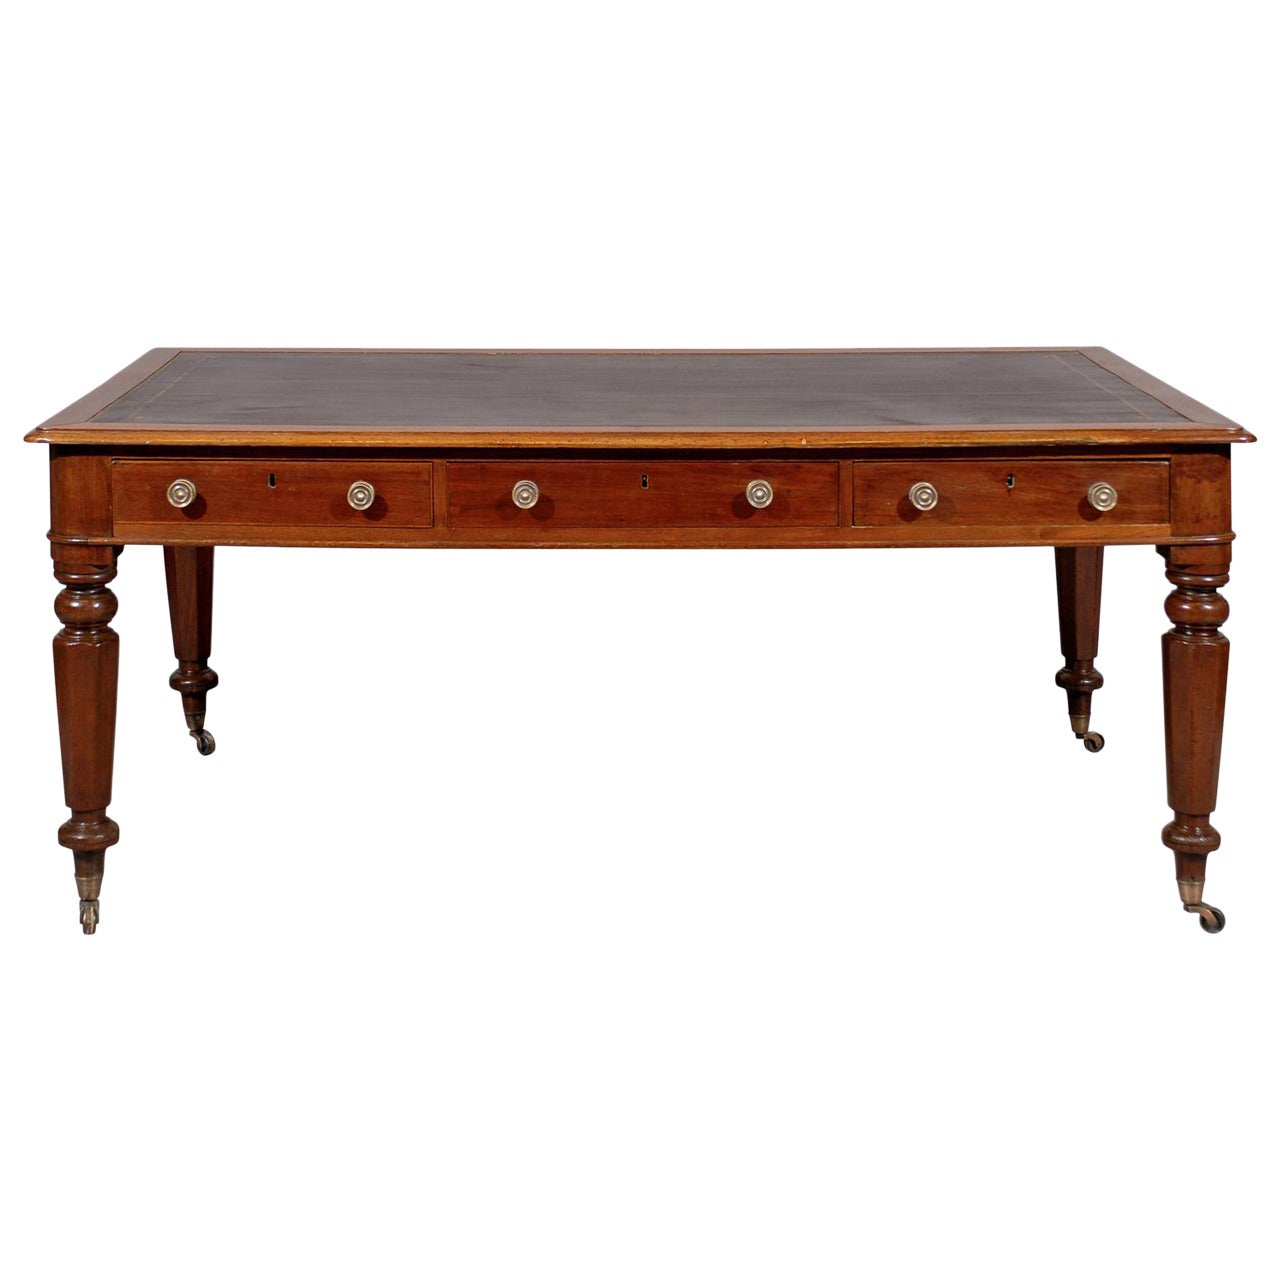 Large 19th Century English Writing Table or Partner's Desk with Leather Top